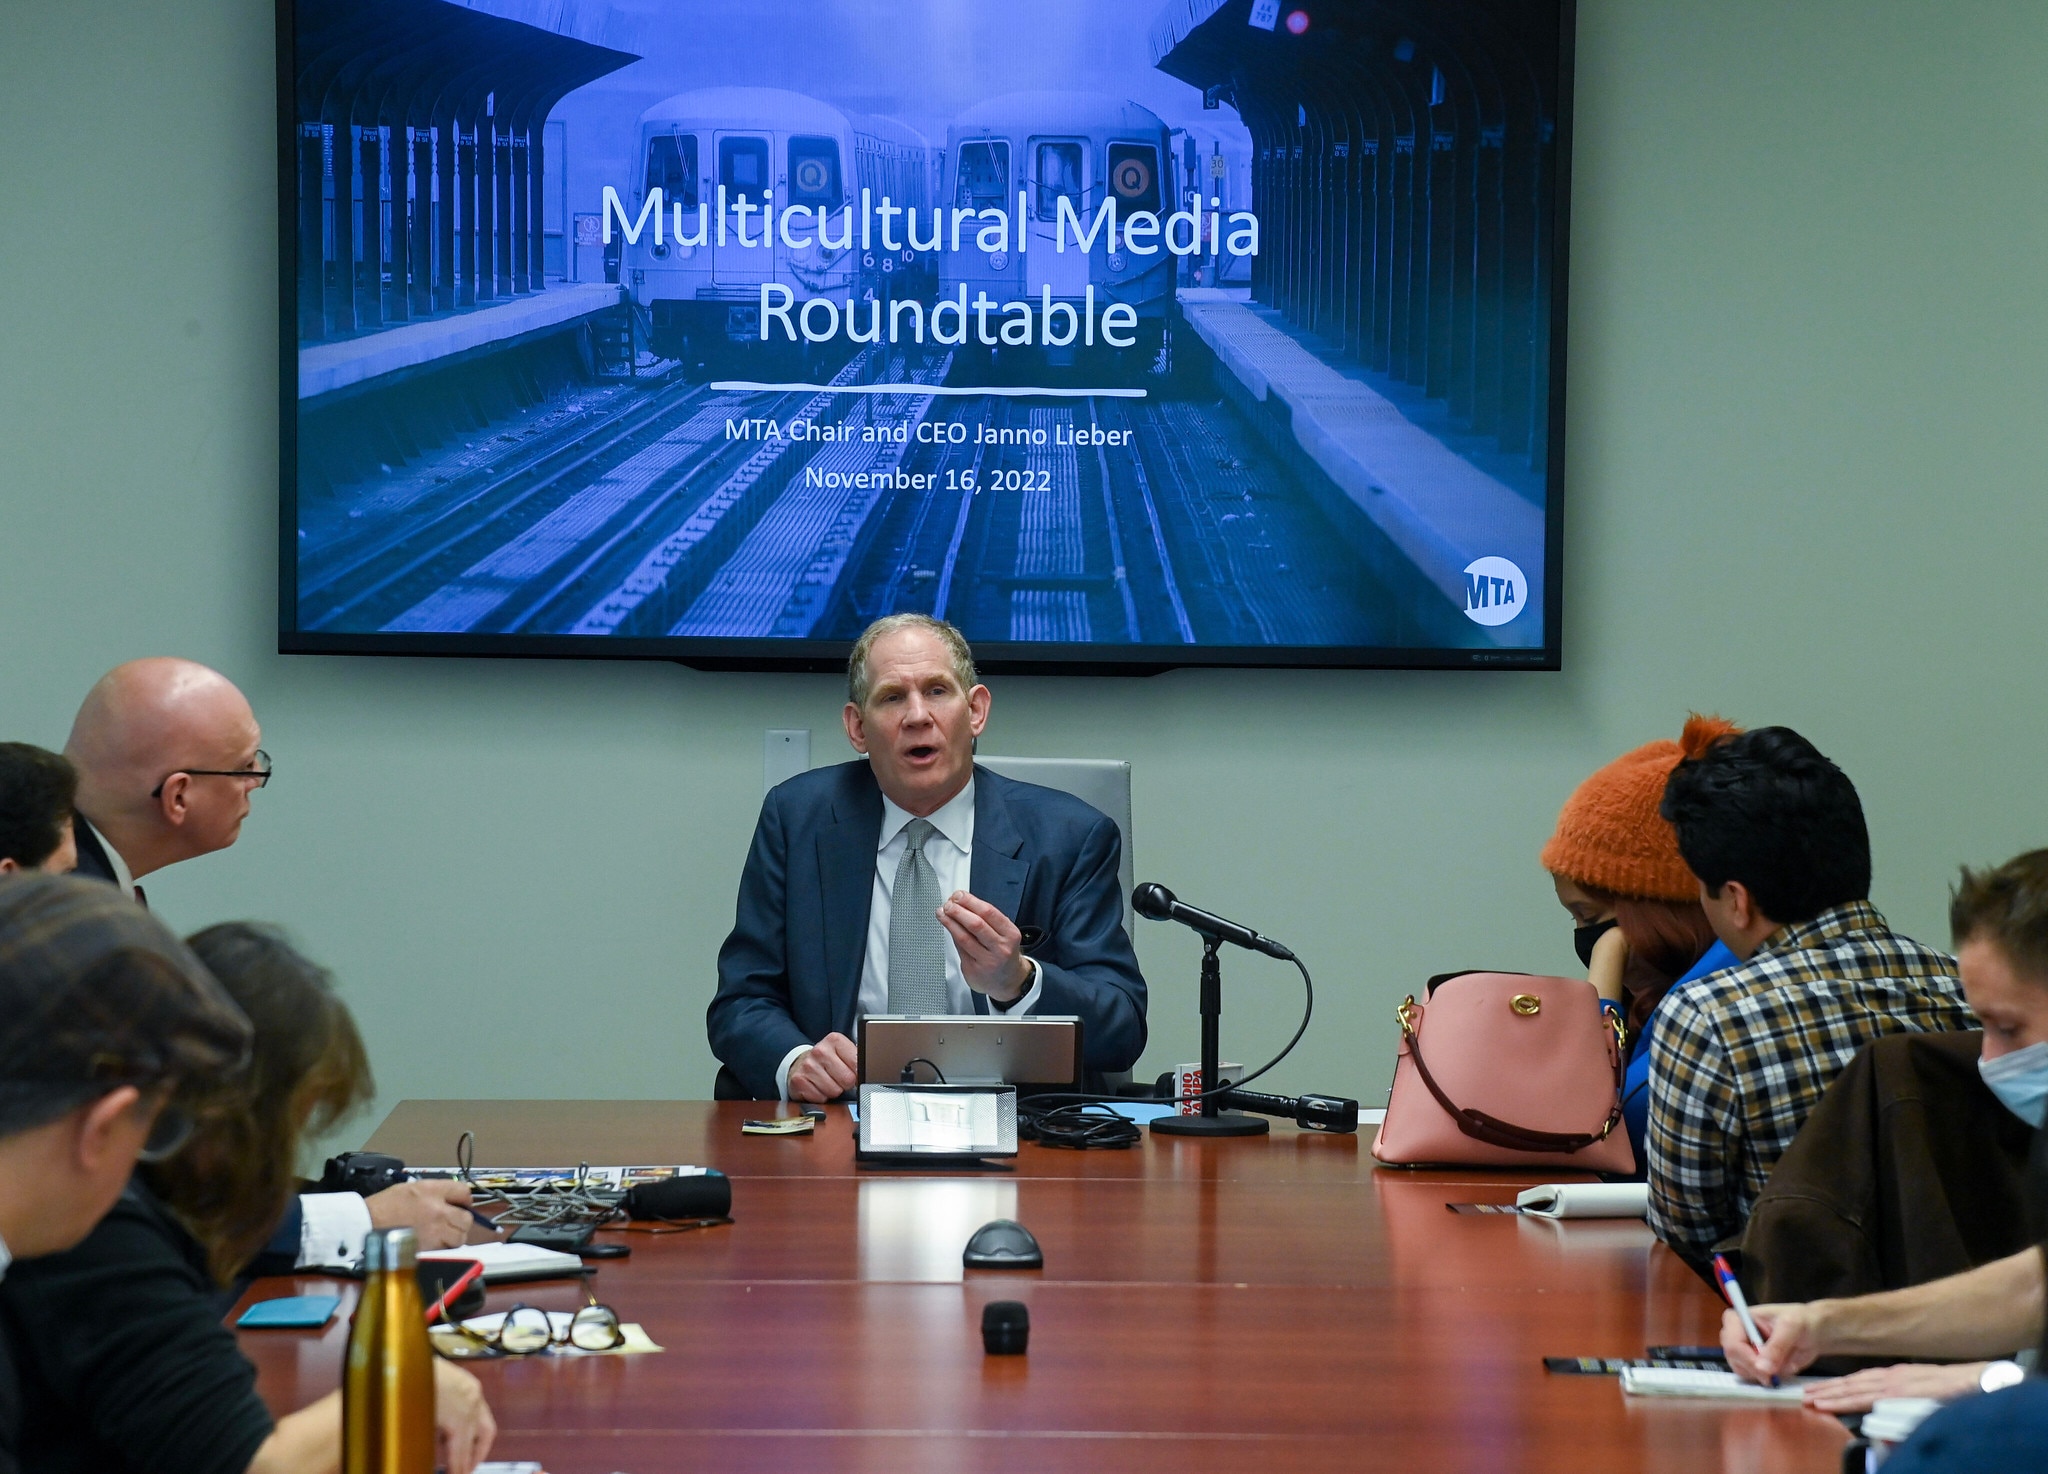 PHOTOS: MTA Hosts Multicultural and Community Media Roundtable